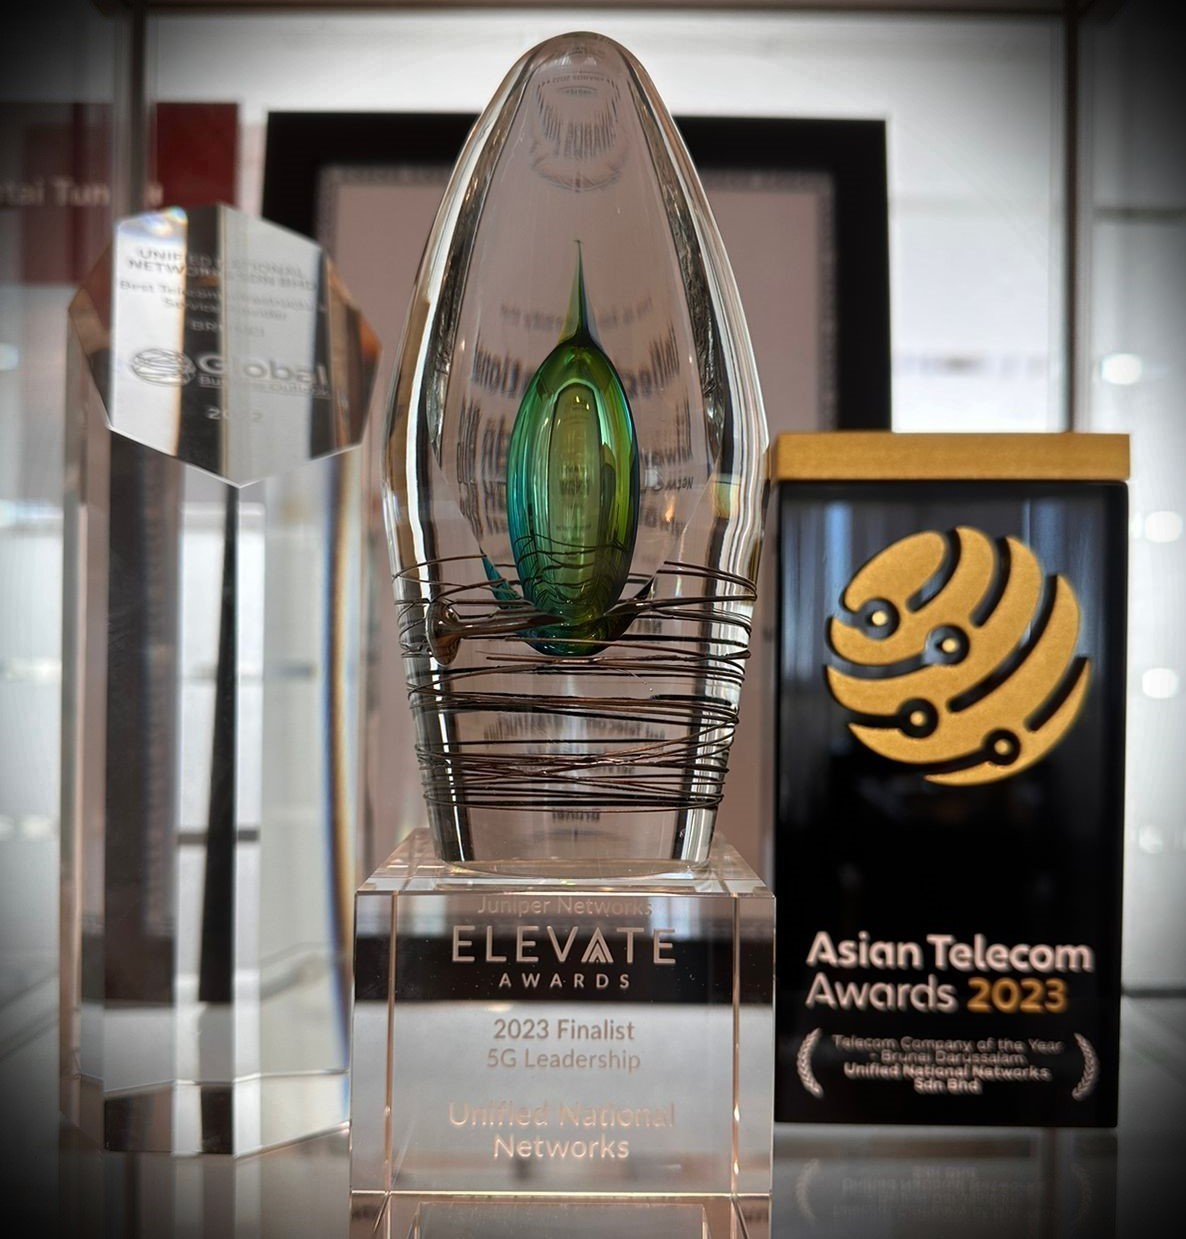 UNN recognized for its innovation at 2023 Elevate Awards.